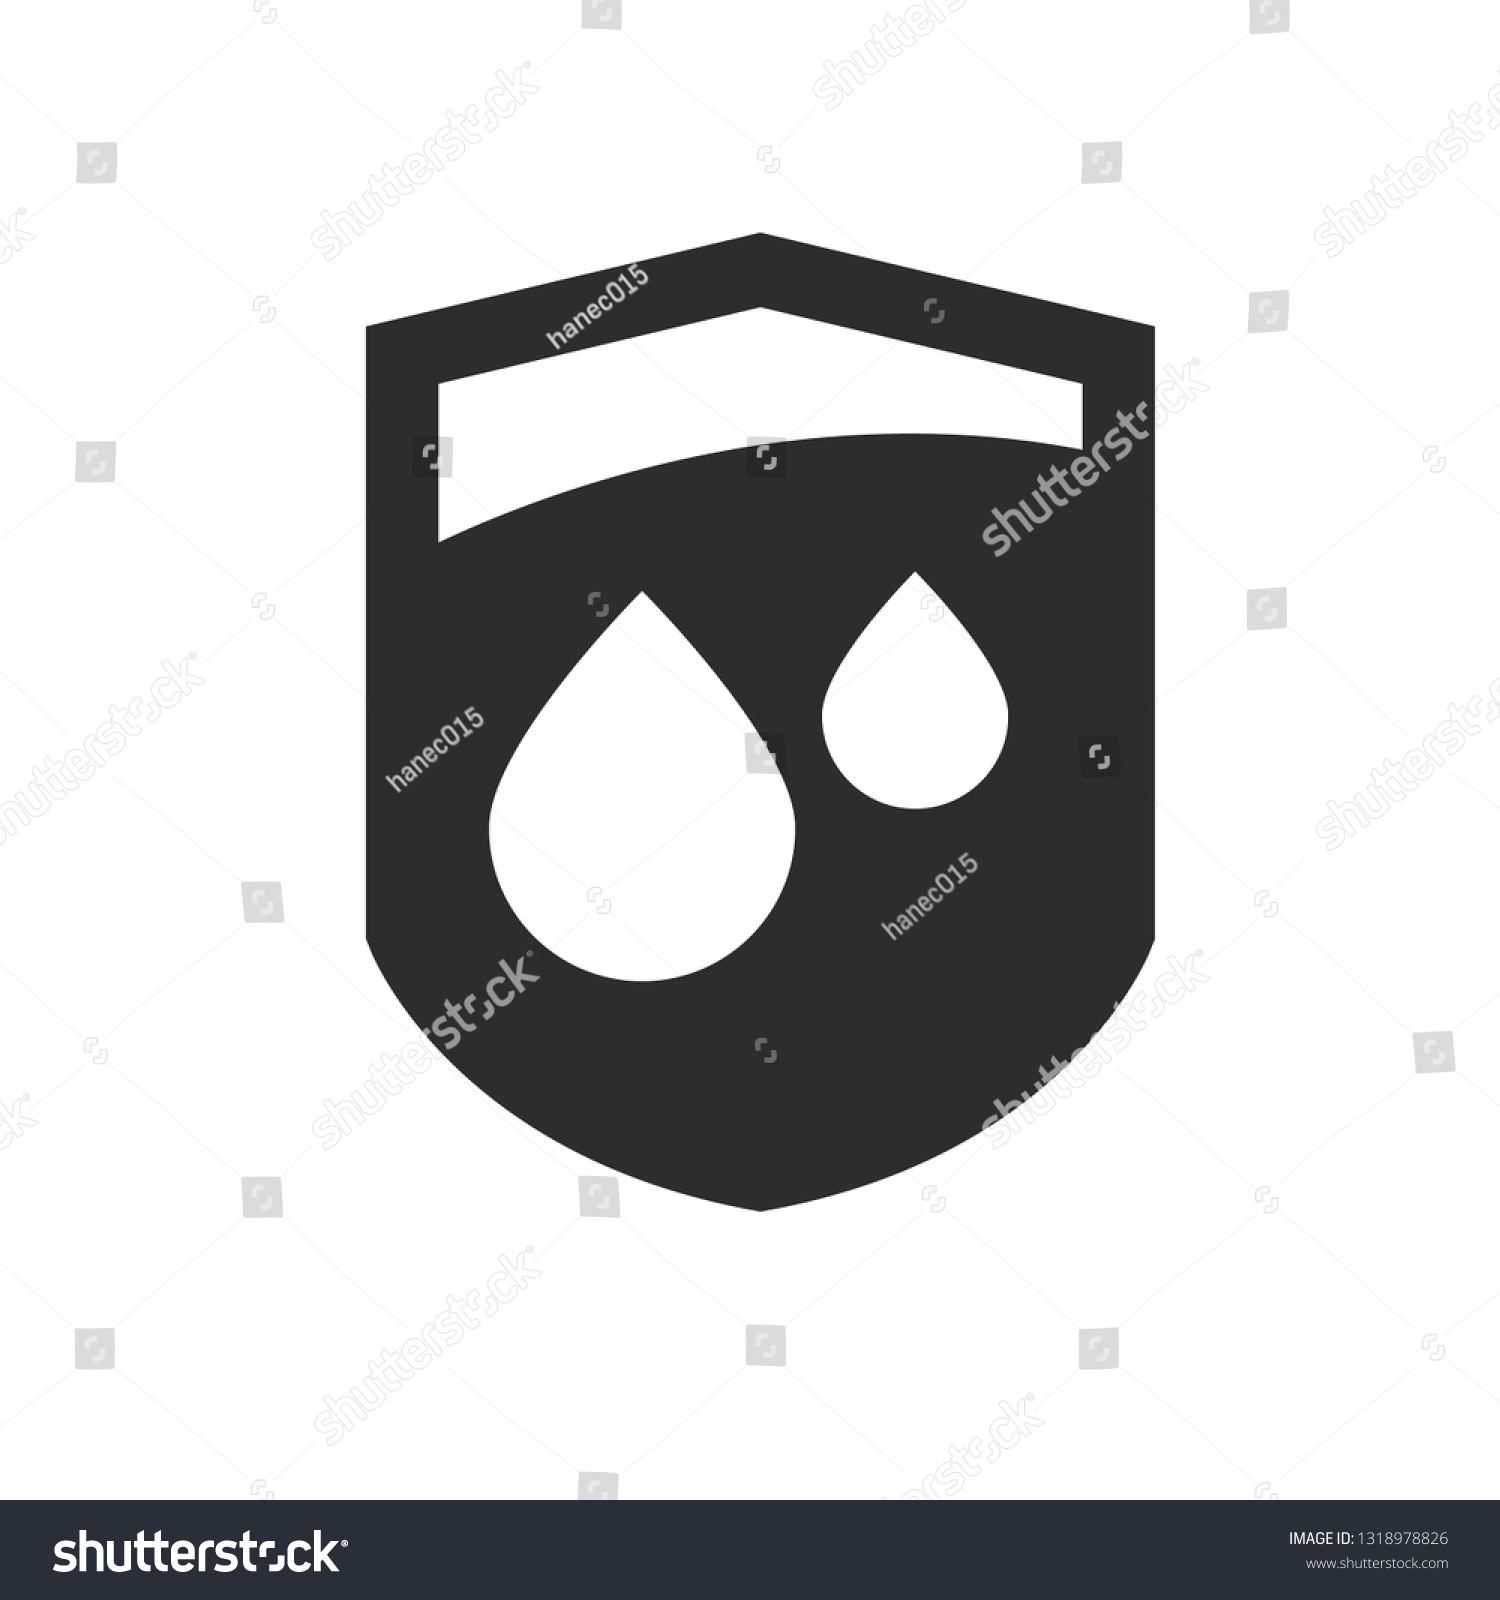 waterproof vector icon.drop and coat of arms symbol. Can be used as icon for security, protected graphic object. transparent object #1318978826